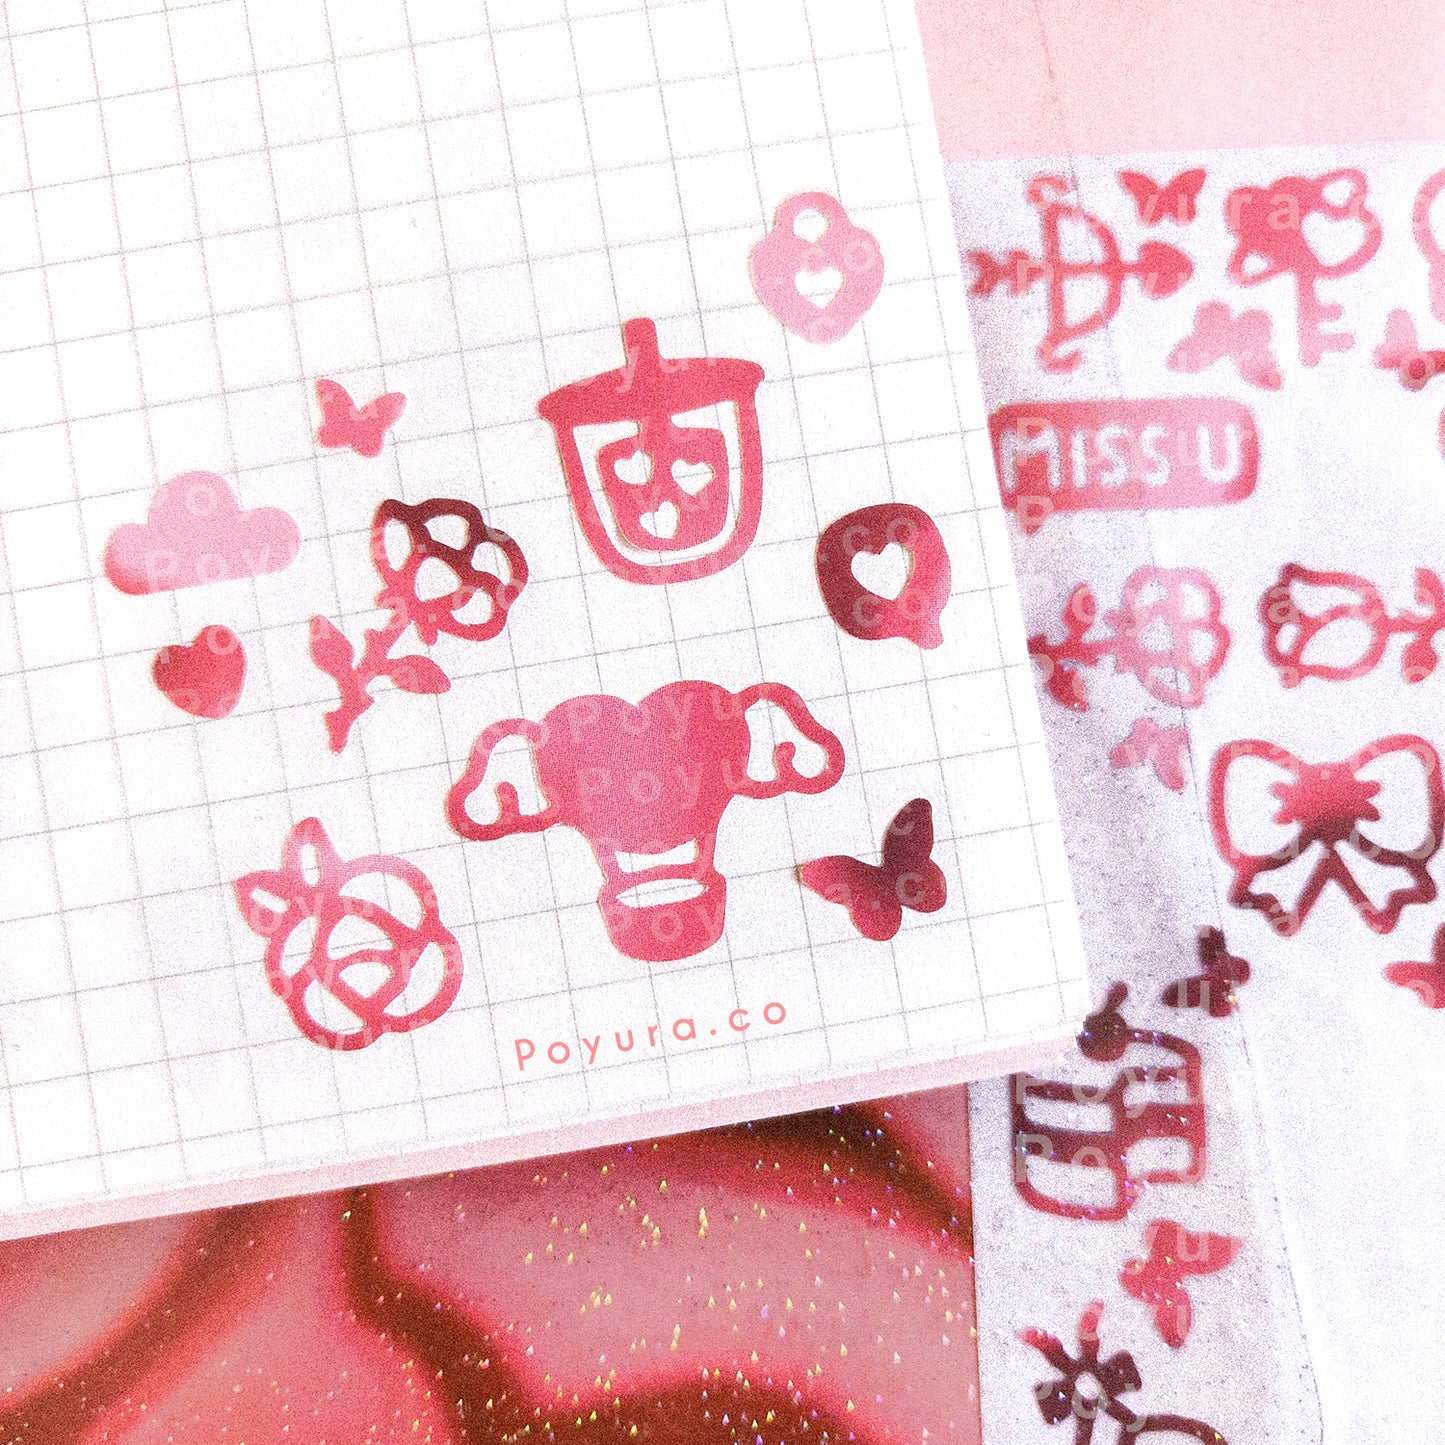 Valentine love deco tiny small filler star sparkle heart ribbon arrow bow donut hot air balloon bubble tea boba shopping selflove bear plushie butterfly strawberry chocolate sweets food drink cake cafe letter aesthetic cute polco deco kpop journal toploader sticker sheet